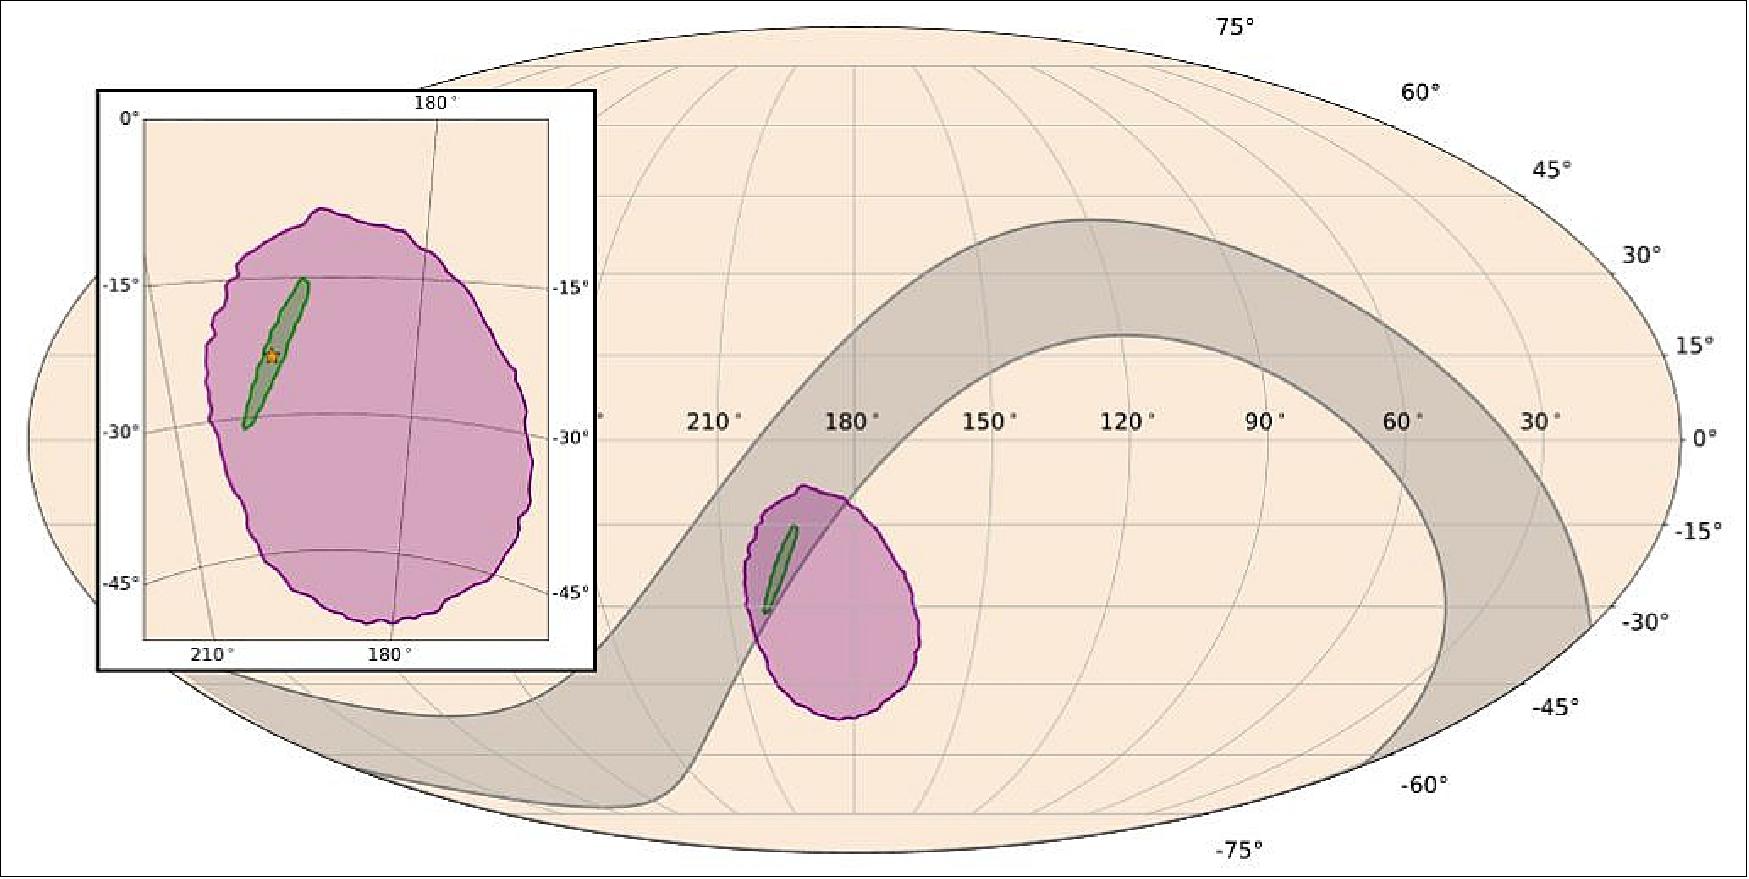 Figure 33: The skymap created by LIGO-Virgo (green) showing the possible location of the source of gravitational waves, compared with regions containing the location of the gamma ray burst source from Fermi (purple) and INTEGRAL (grey). The inset shows the actual position of the galaxy (orange star) containing the "optical transient" that resulted from the merger of two neutron stars (image credit: NASA/ESO)